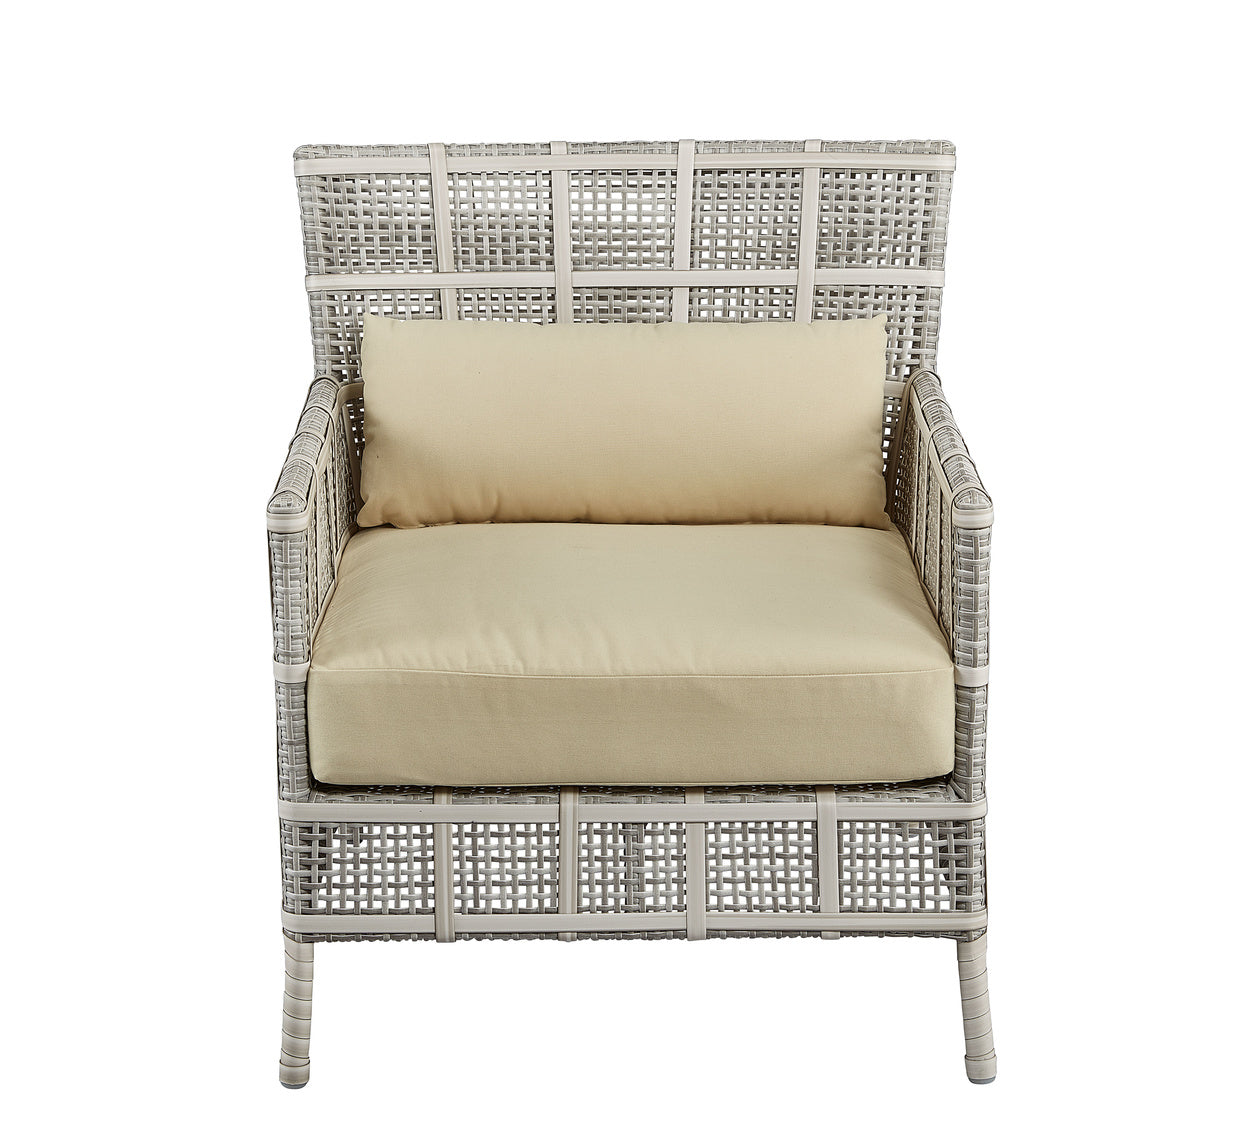 Squaresville Outdoor Modern Chair